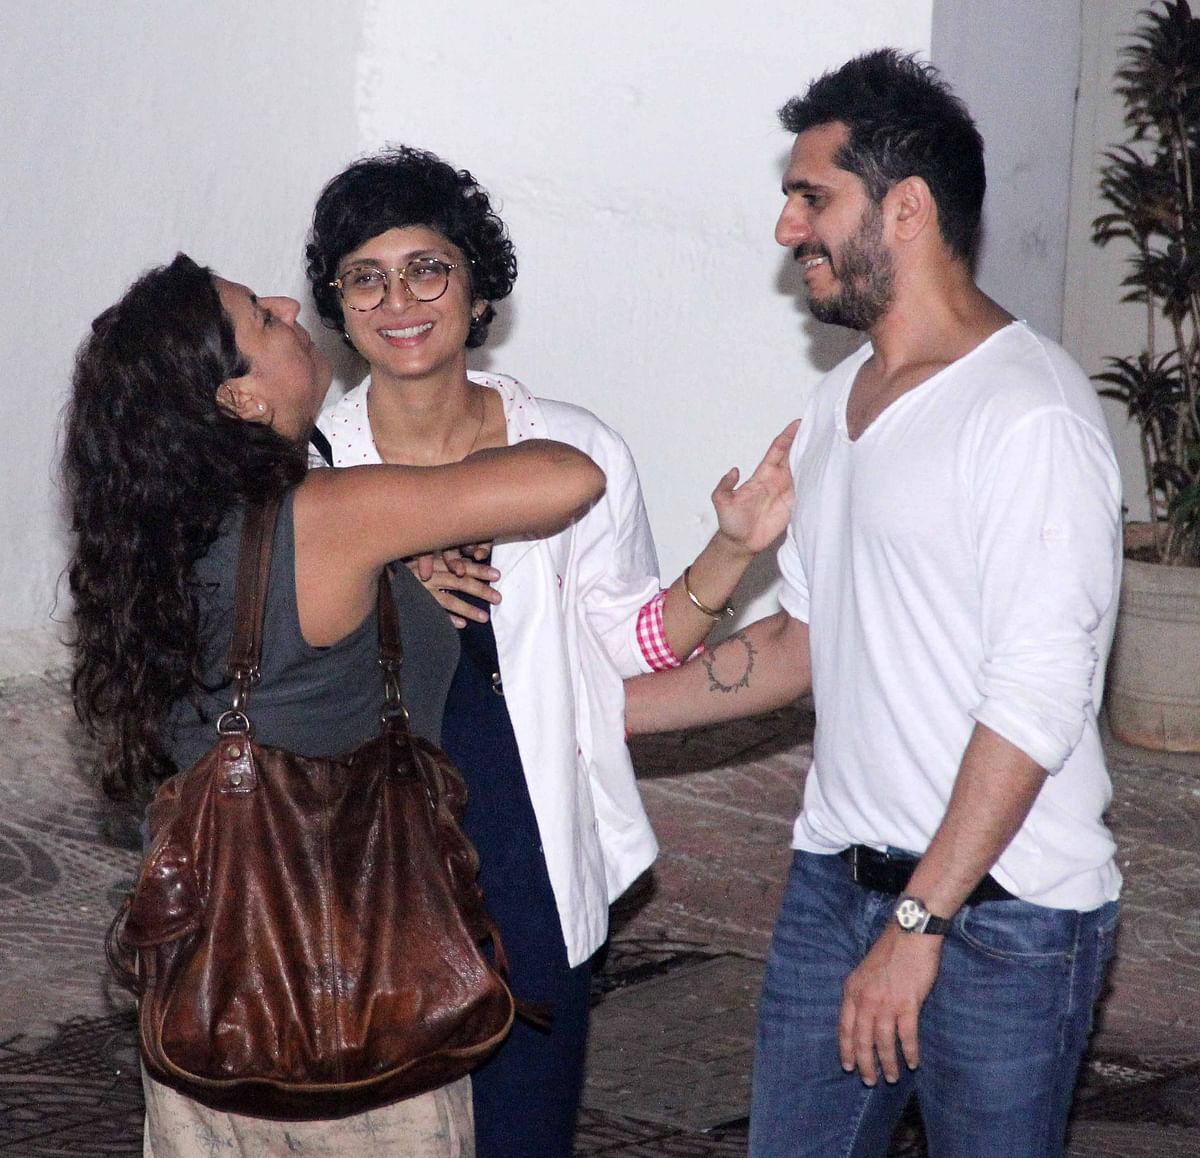 Check out how Farhan Akhtar’s partied away with Chris Martin, Zoya Akhtar and Kiran Rao.